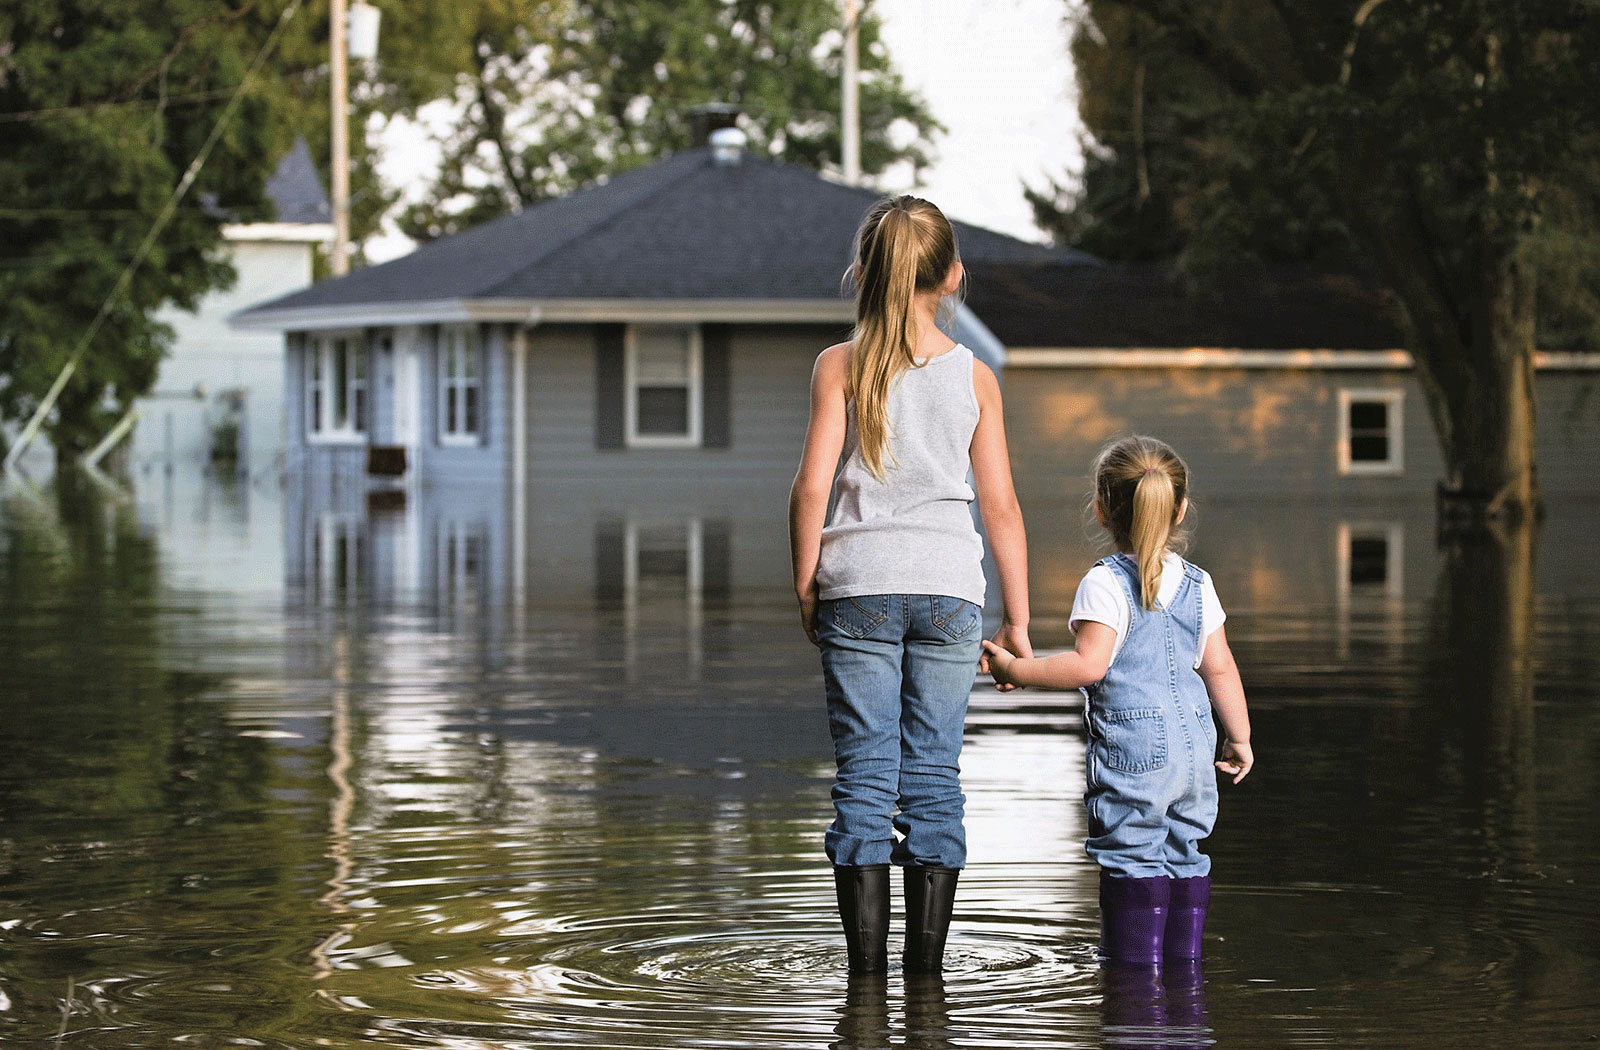 Call Our Disaster Repair Company to Help Restore Your Property